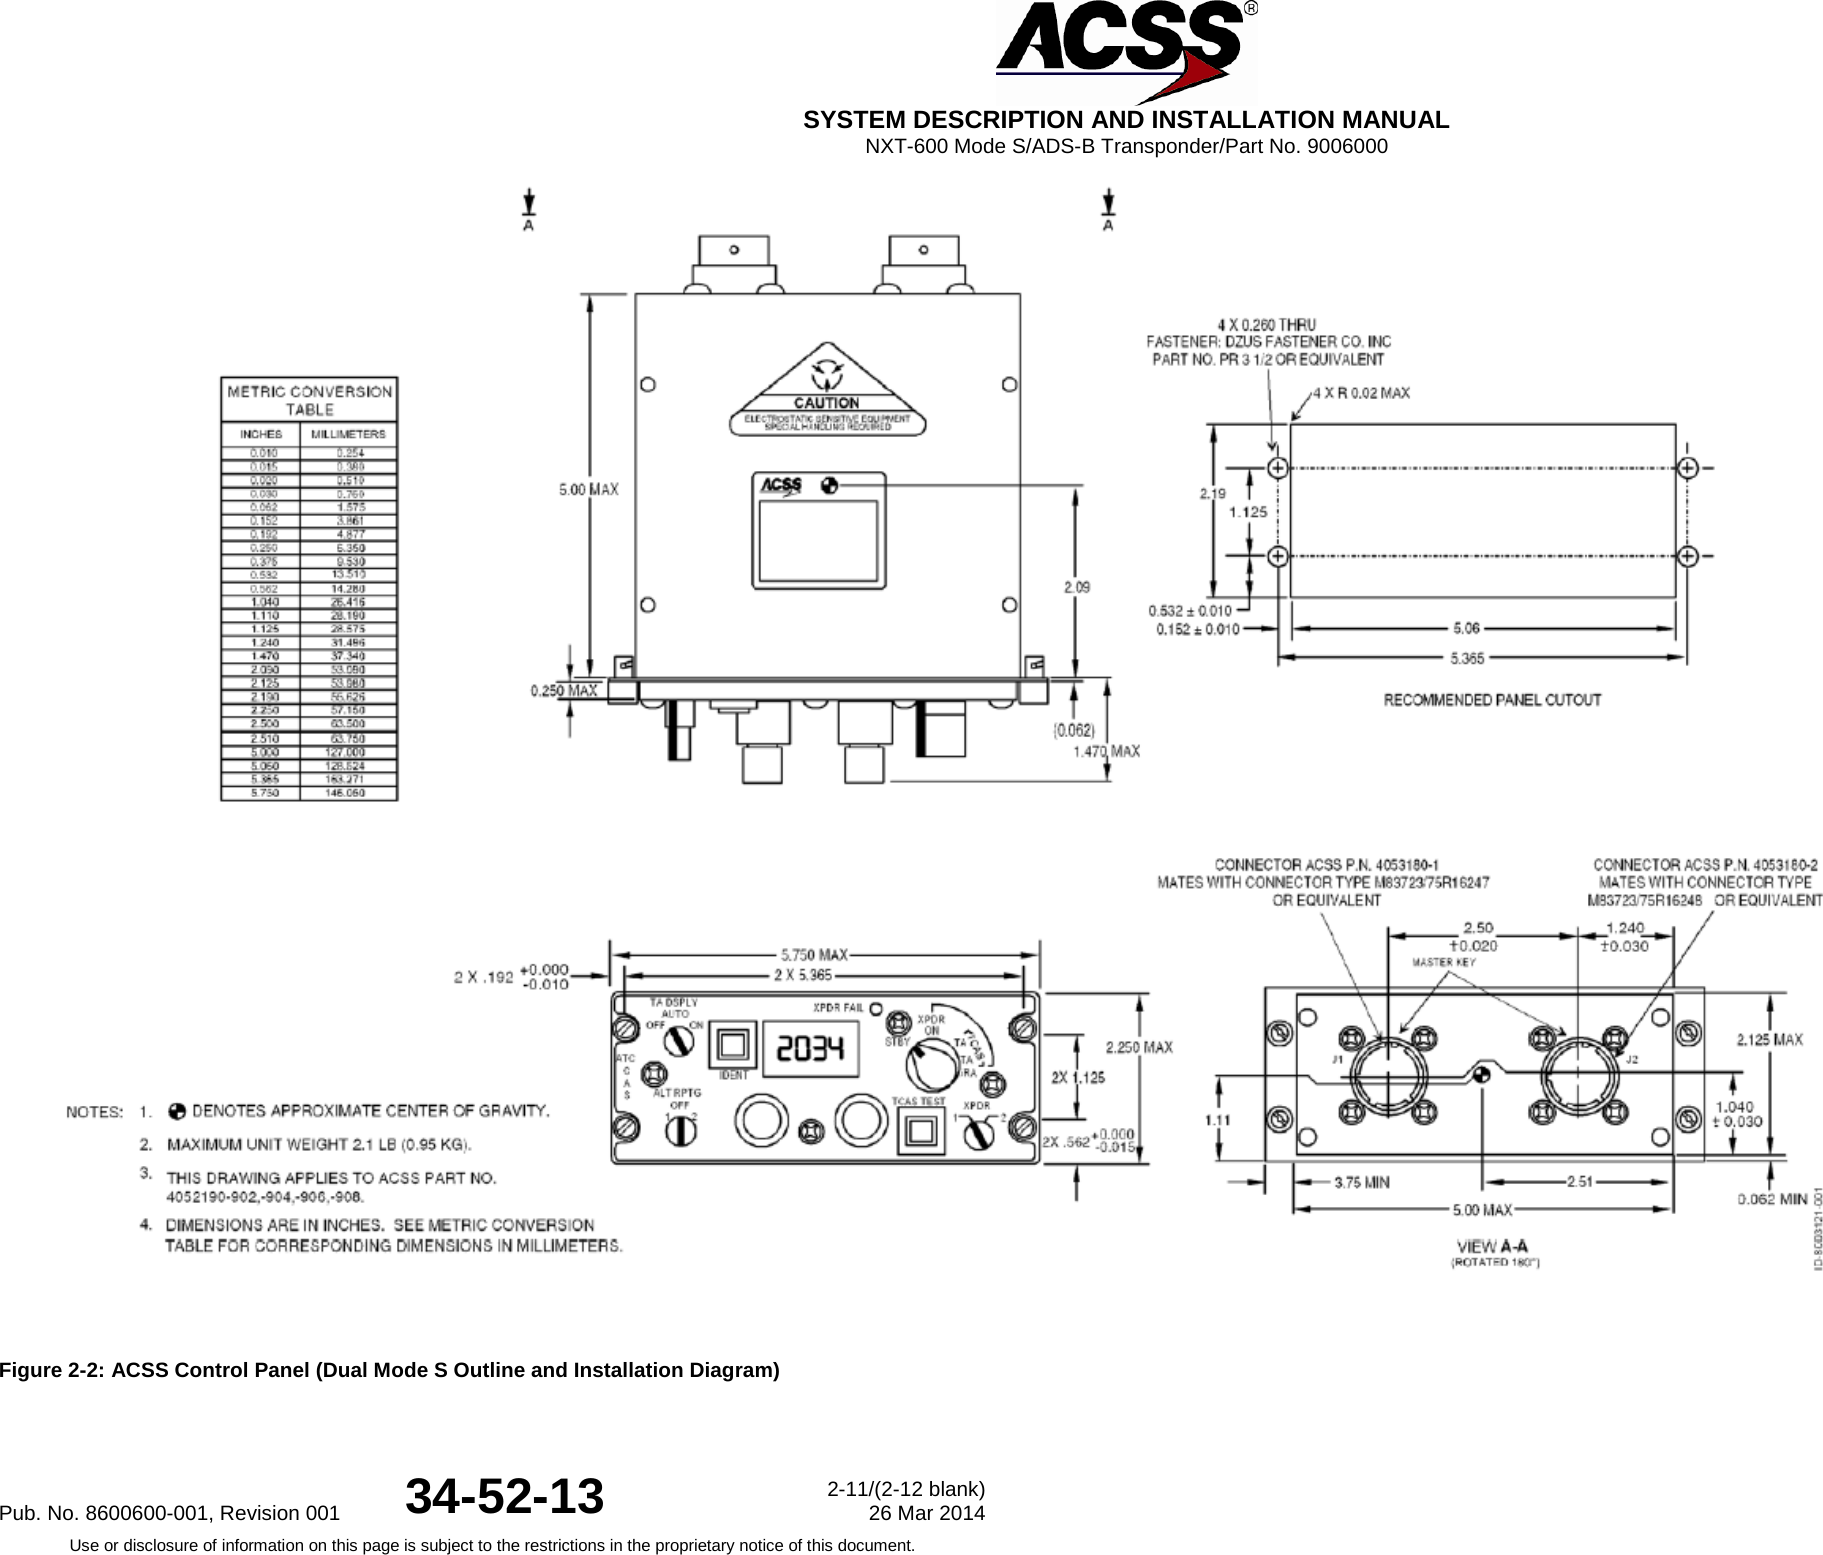  SYSTEM DESCRIPTION AND INSTALLATION MANUAL NXT-600 Mode S/ADS-B Transponder/Part No. 9006000  Figure 2-2: ACSS Control Panel (Dual Mode S Outline and Installation Diagram)Pub. No. 8600600-001, Revision 001 34-52-13 2-11/(2-12 blank) 26 Mar 2014 Use or disclosure of information on this page is subject to the restrictions in the proprietary notice of this document.  